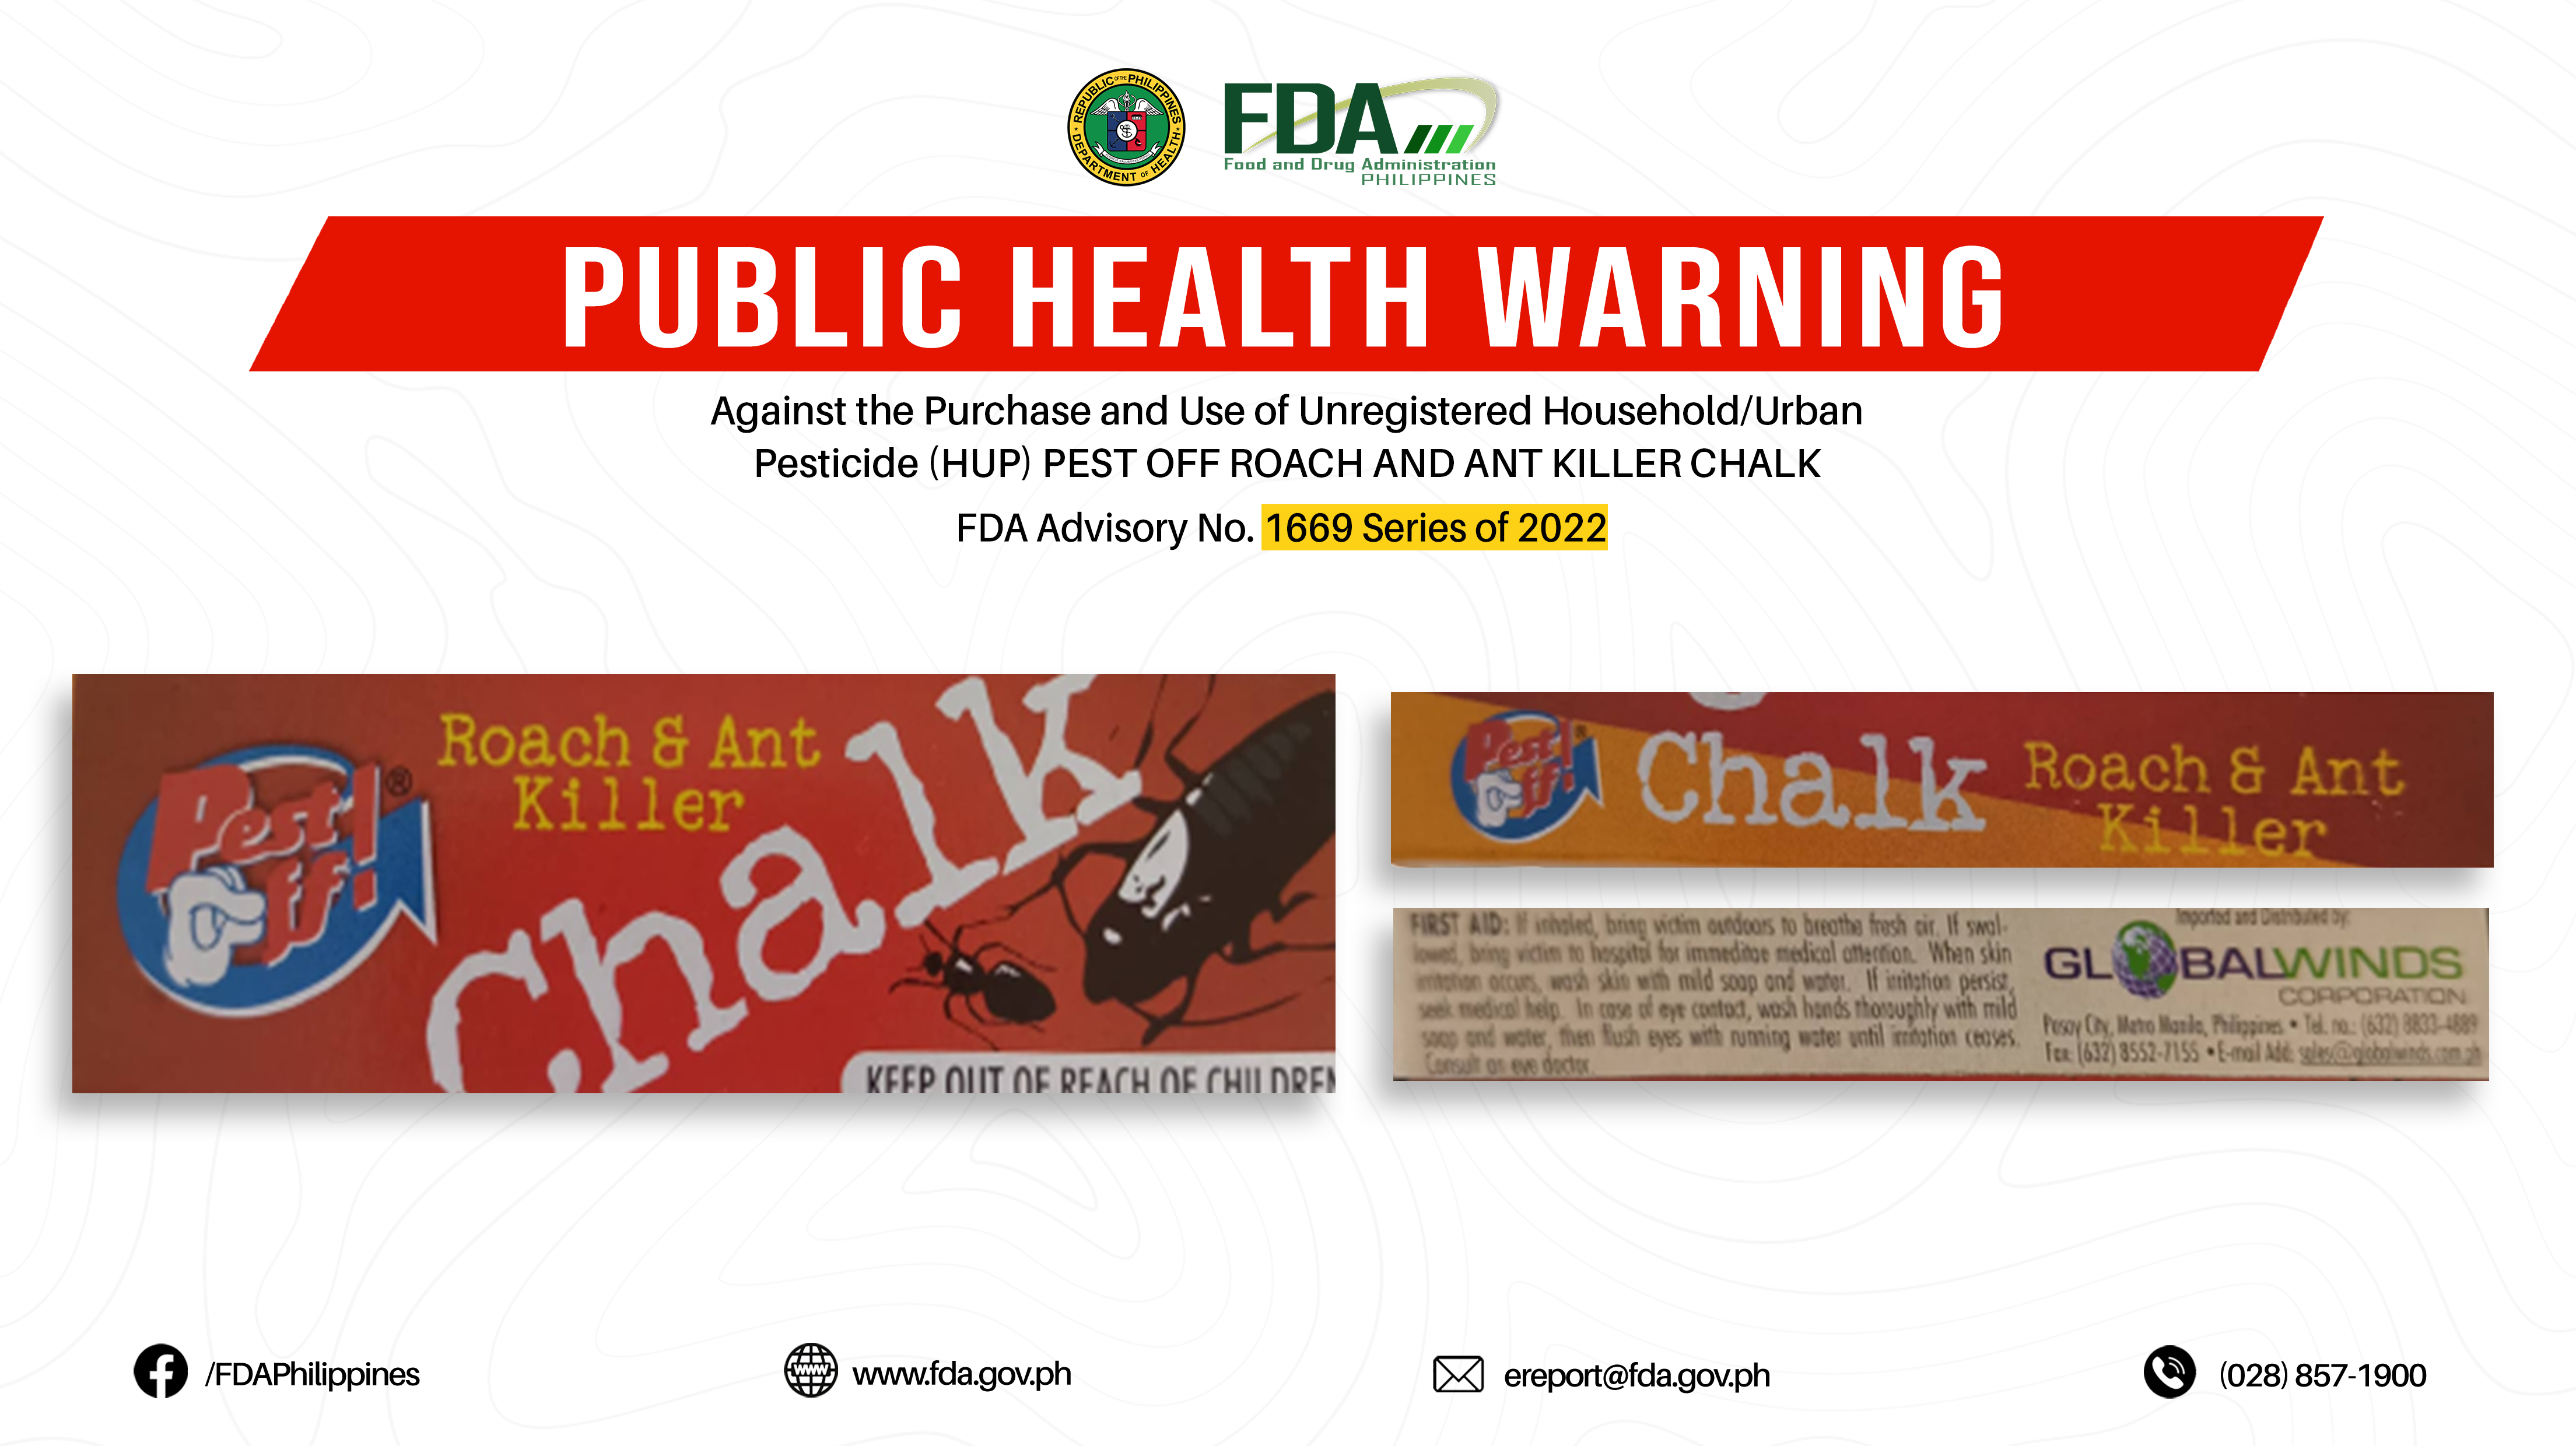 FDA Advisory No.2022-1669 || Public Health Warning Against the Purchase and Use of Unregistered Household/Urban Pesticide (HUP) PEST OFF ROACH AND ANT KILLER CHALK